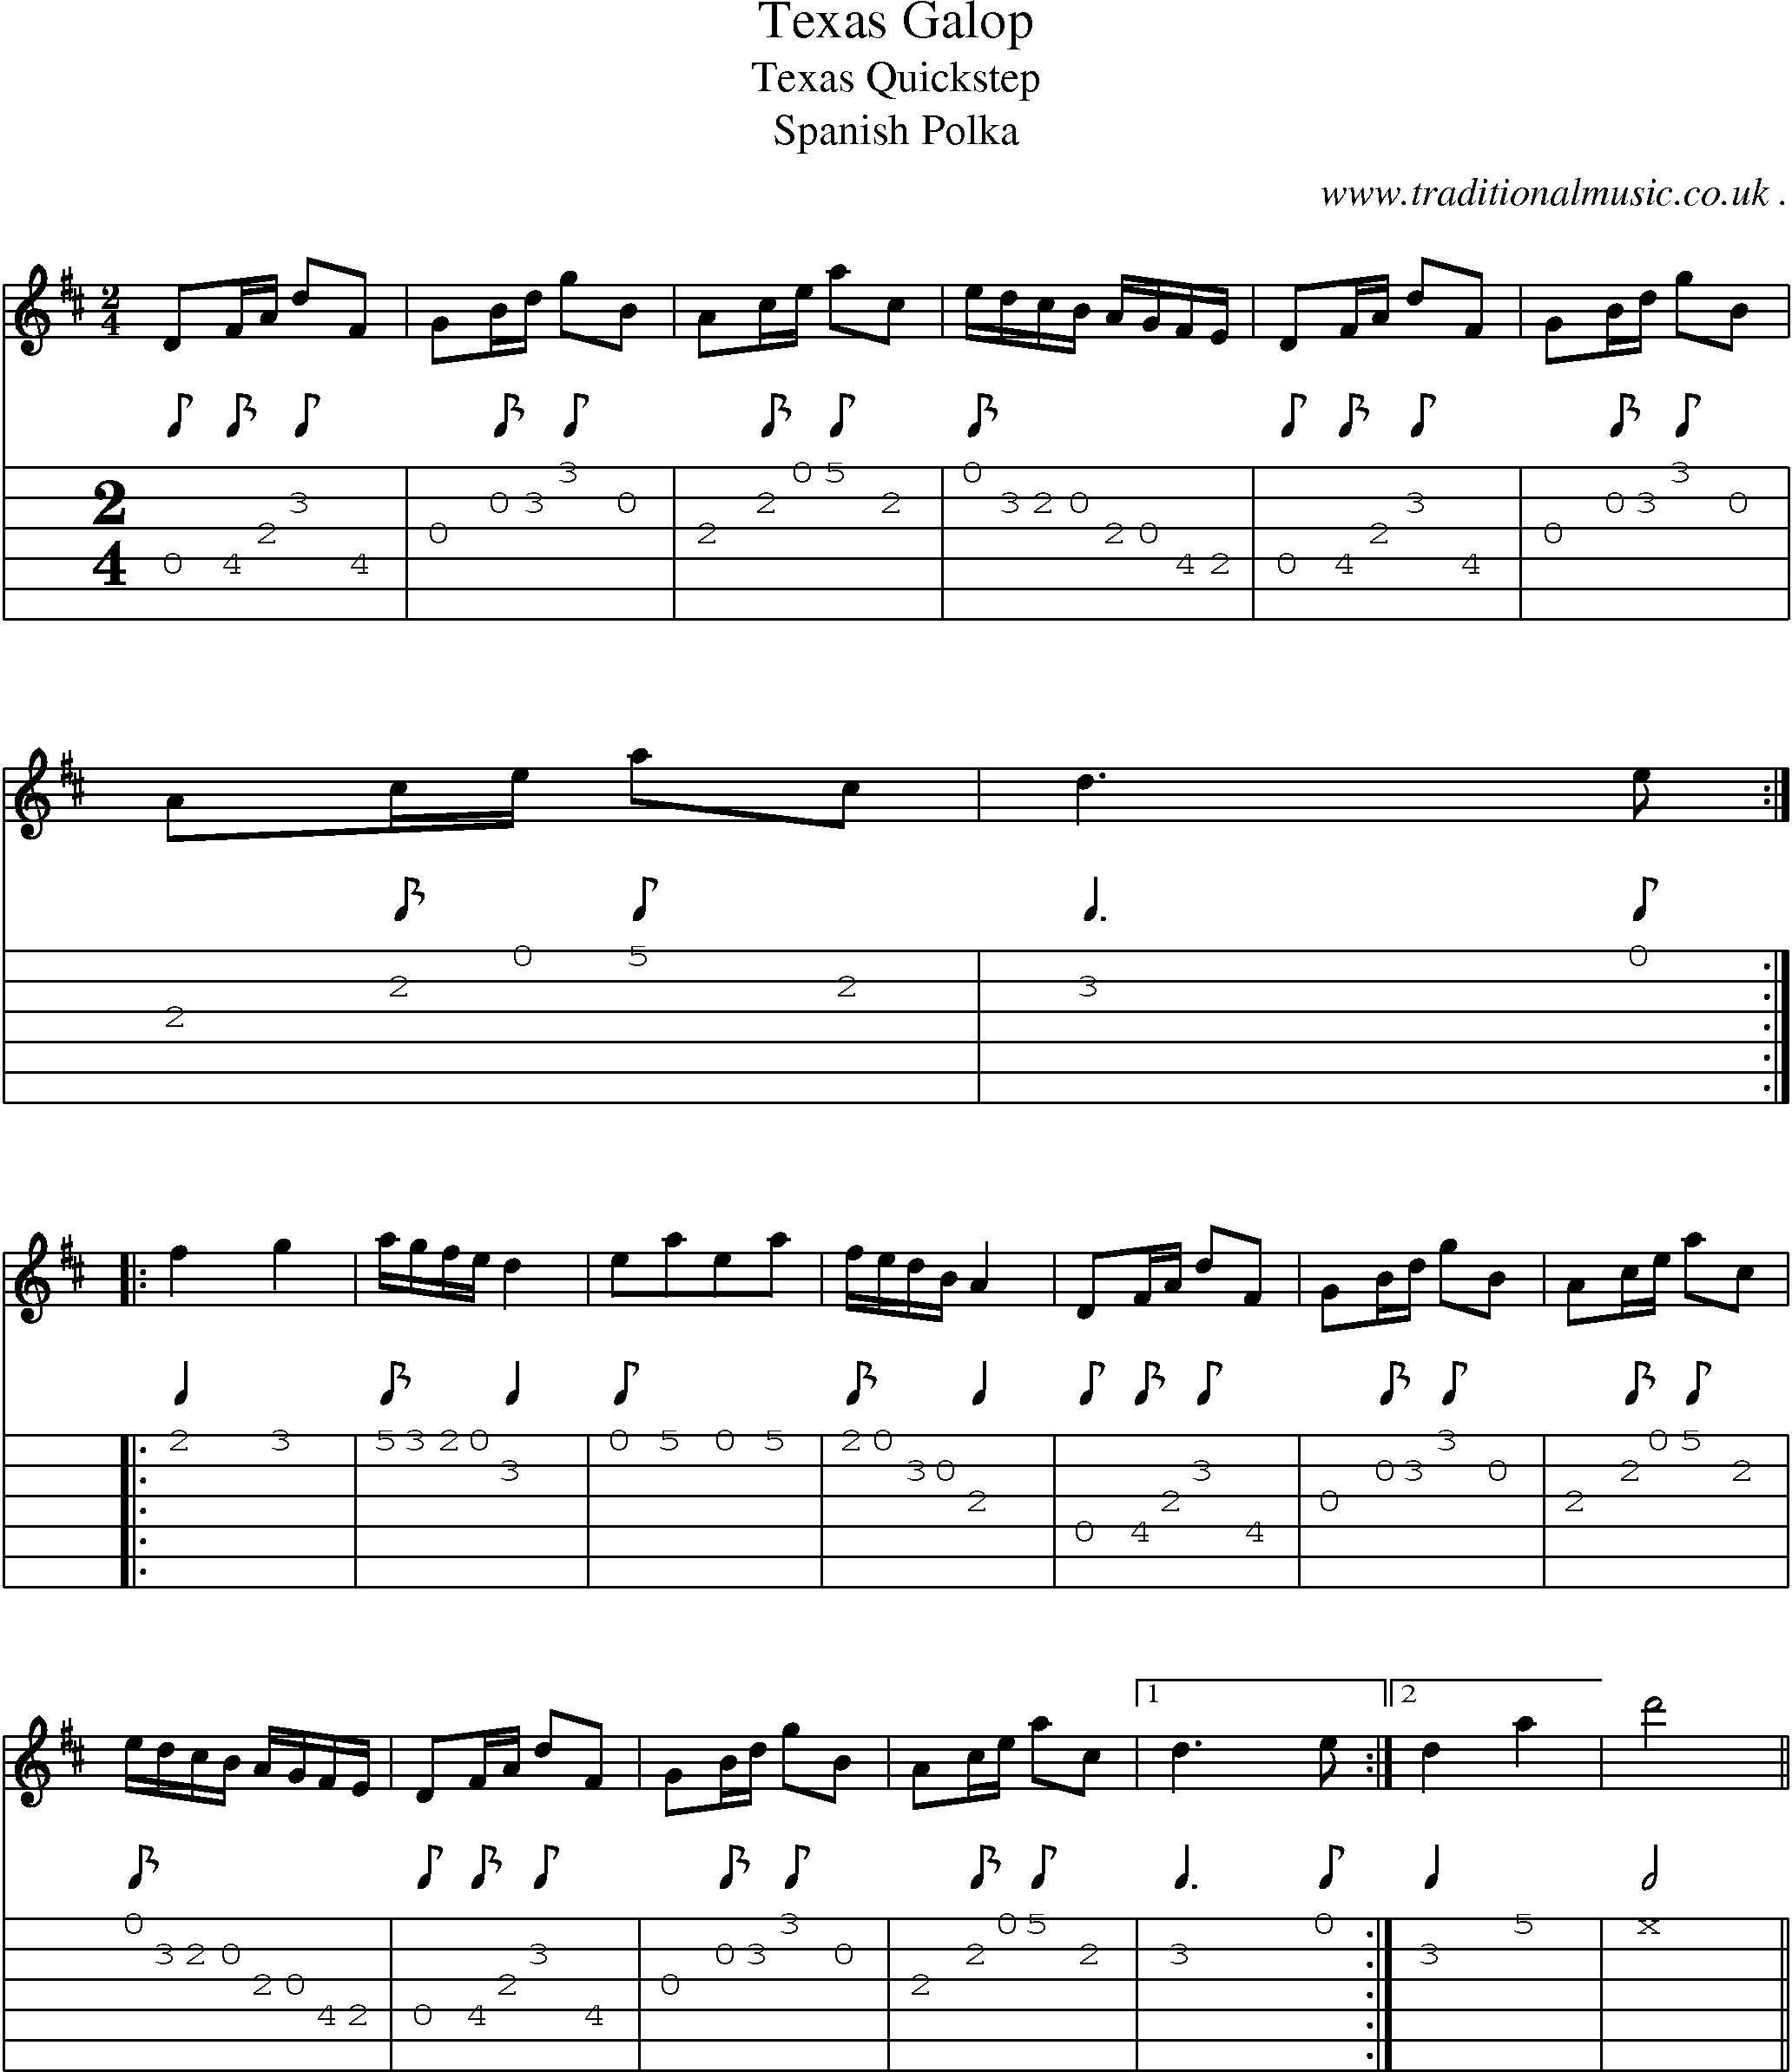 Music Score and Guitar Tabs for Texas Galop